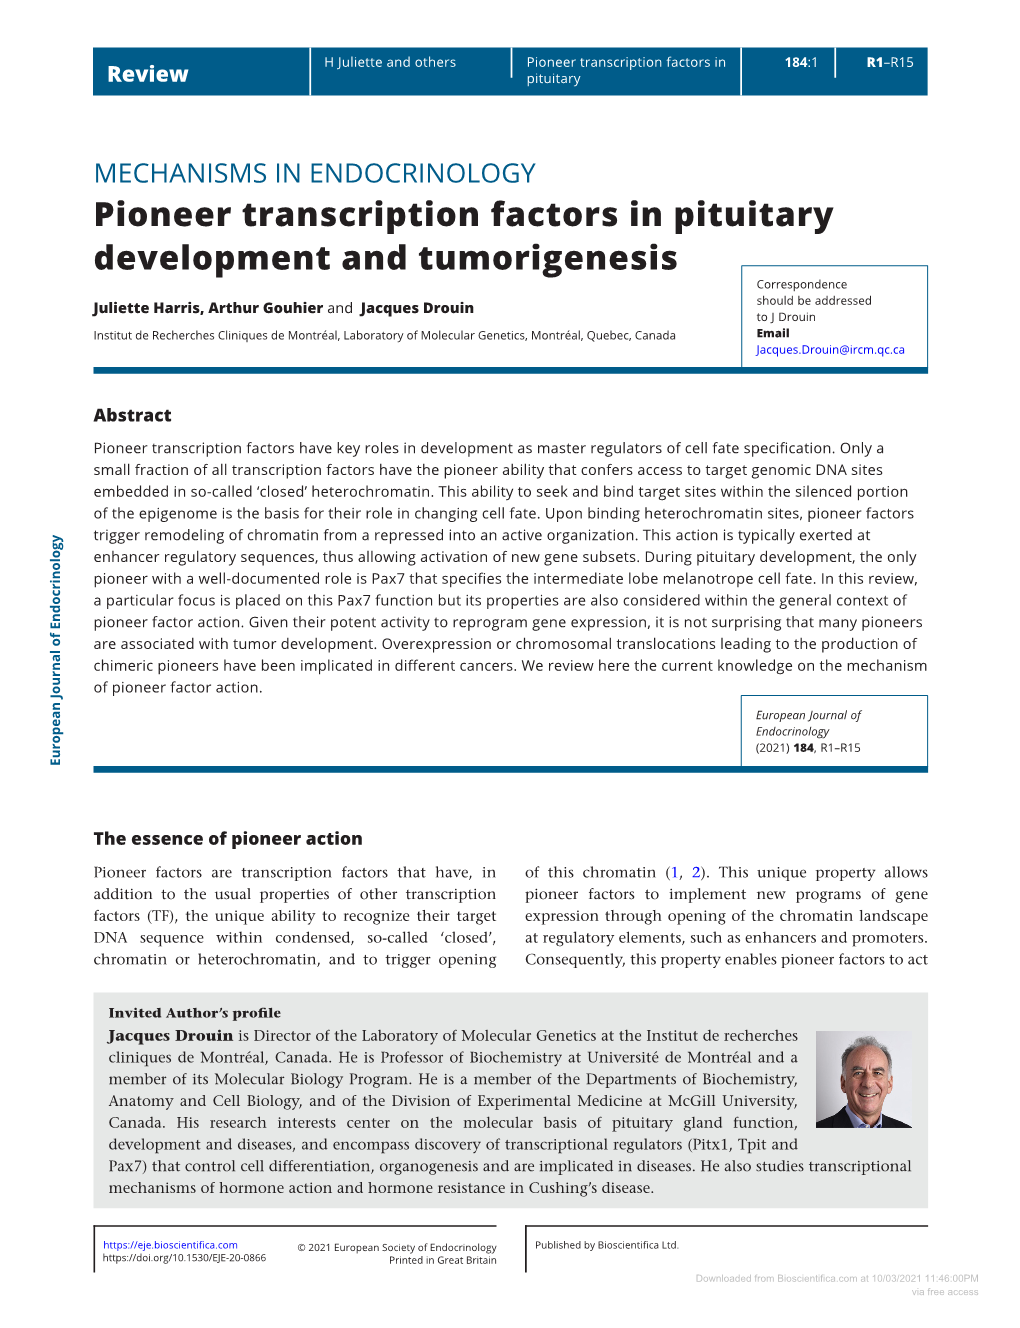 Pioneer Transcription Factors in Pituitary Development And